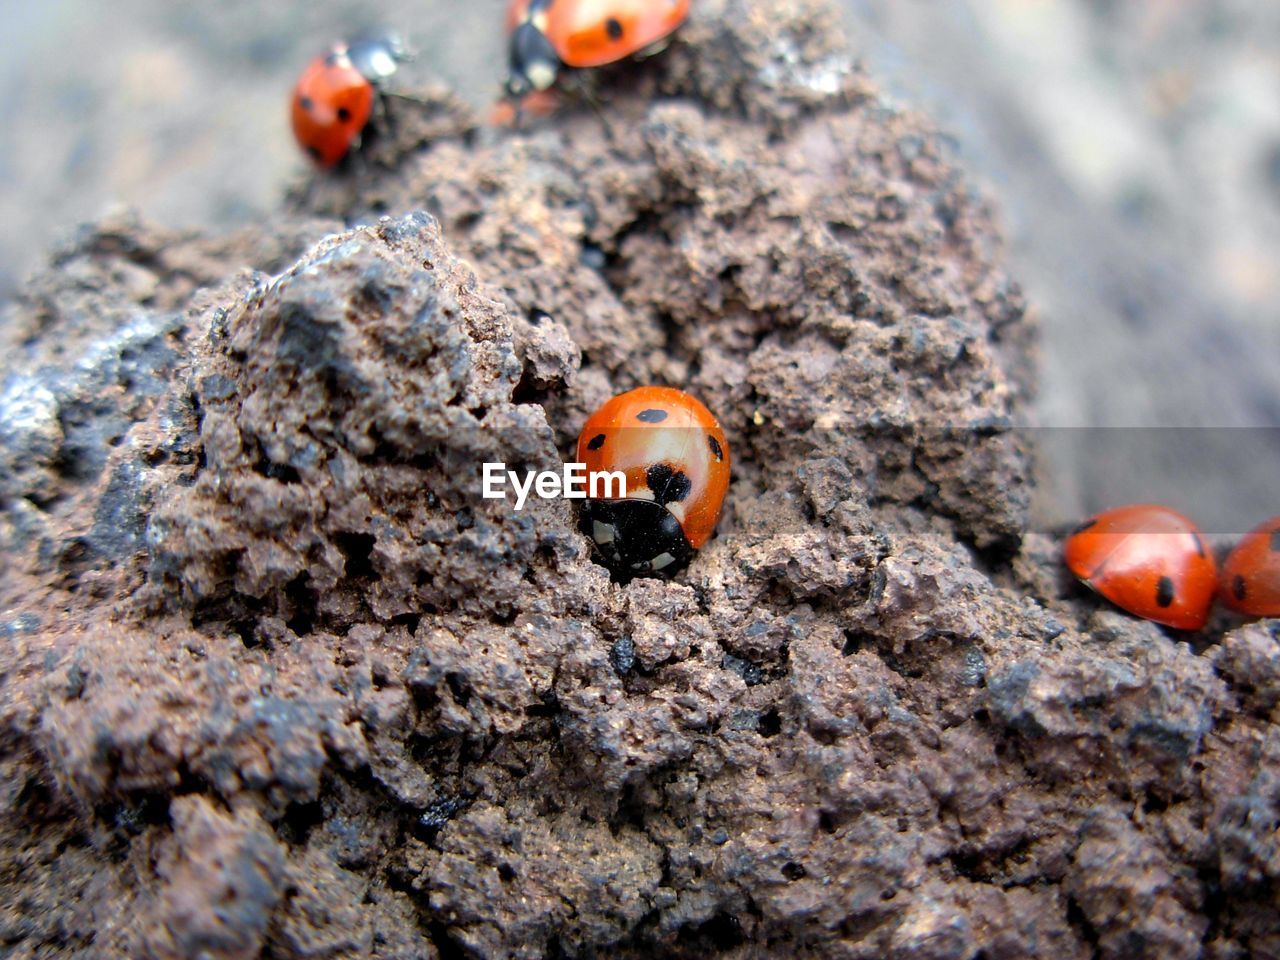 ladybug, animal themes, animal wildlife, beetle, animal, insect, macro photography, wildlife, no people, nature, close-up, day, group of animals, soil, outdoors, food, focus on foreground, orange color, selective focus, red, land, rock, food and drink